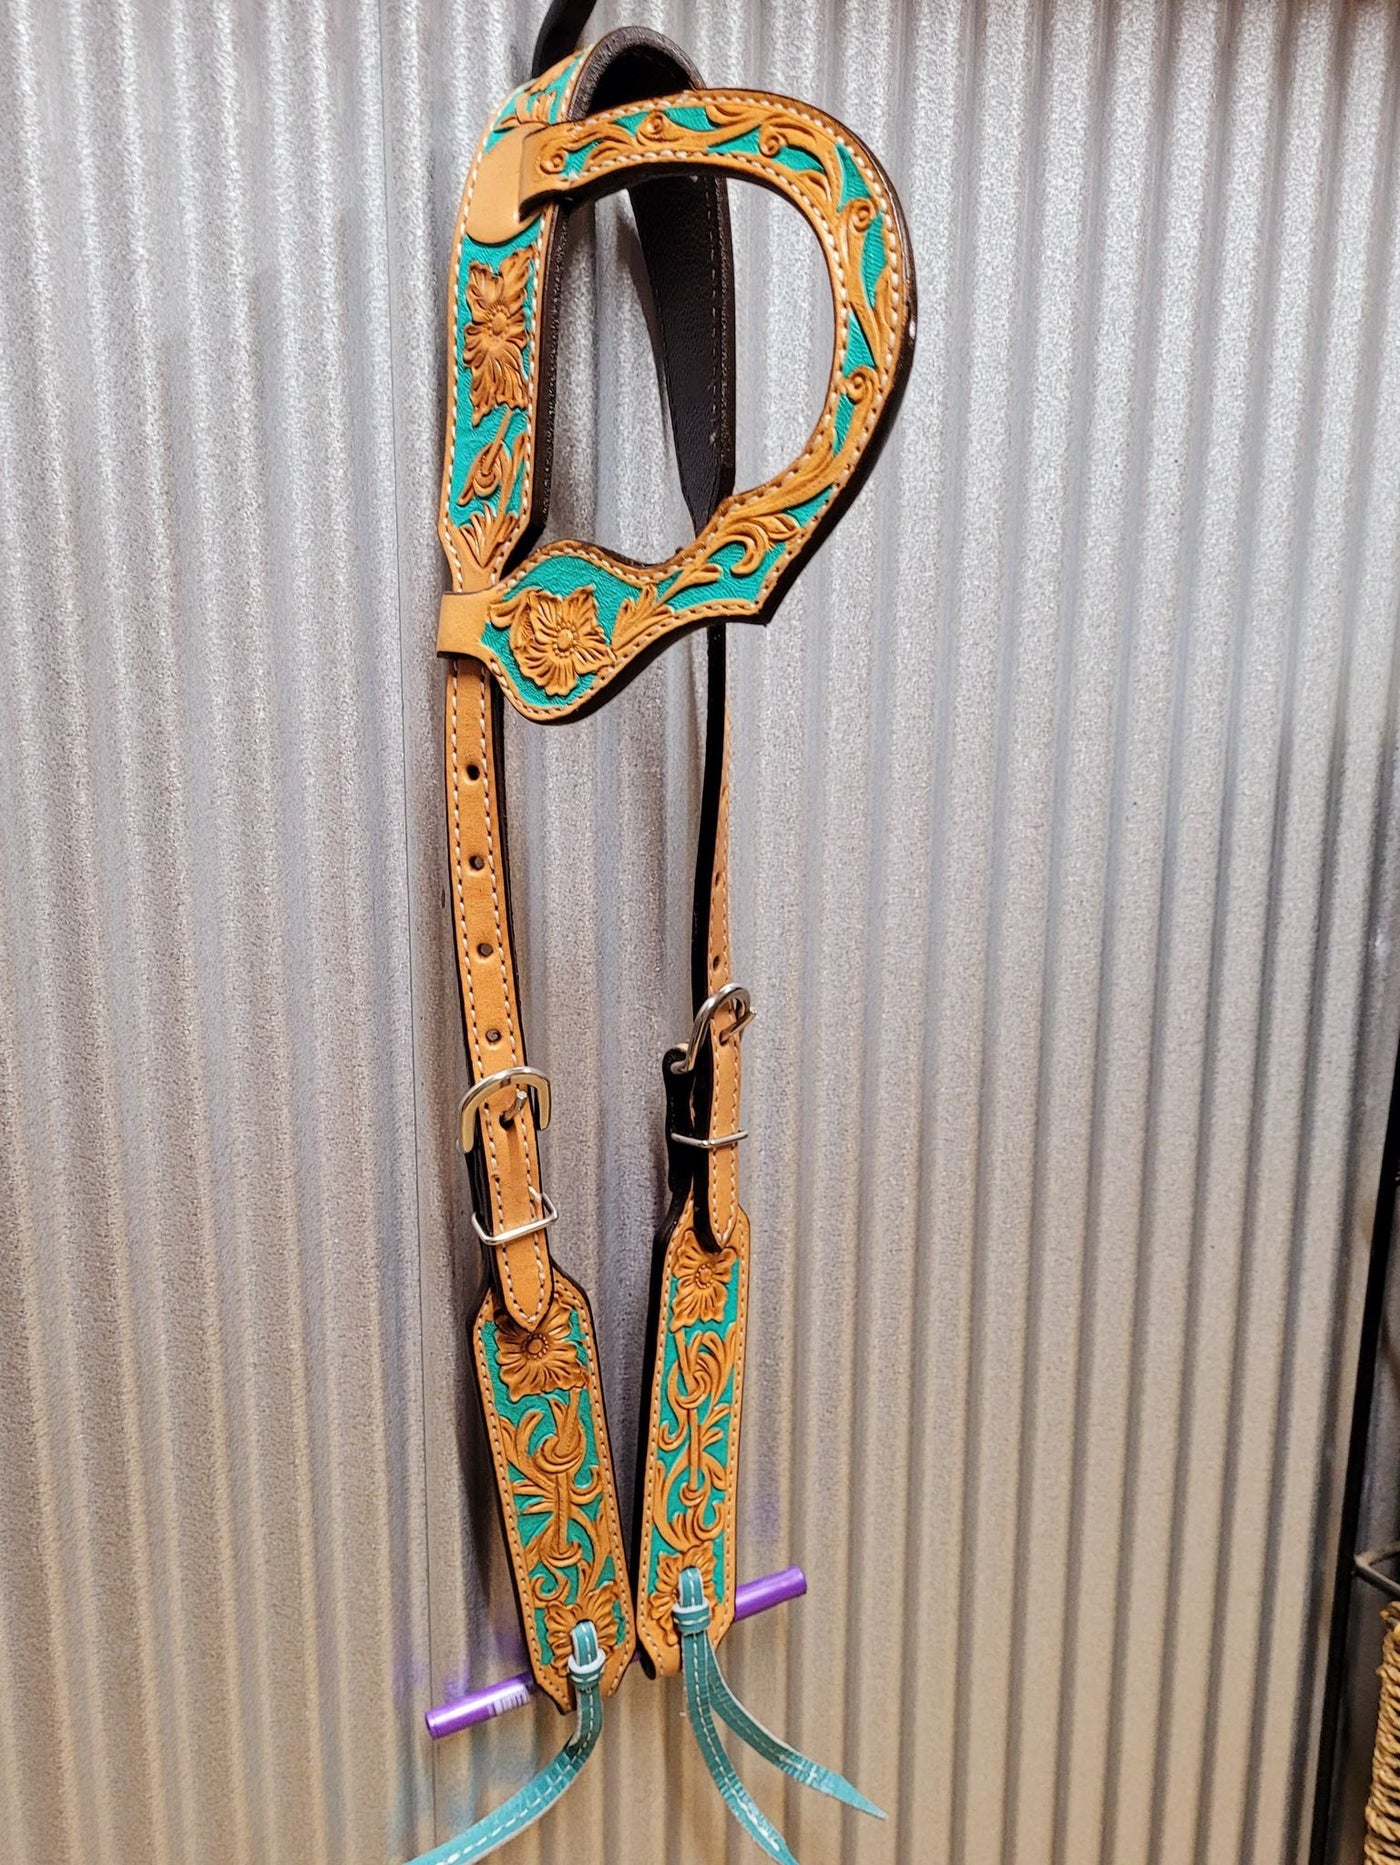 Western Bridle One Ear - Genuine Tooled leather single ear headstall with hand painted design